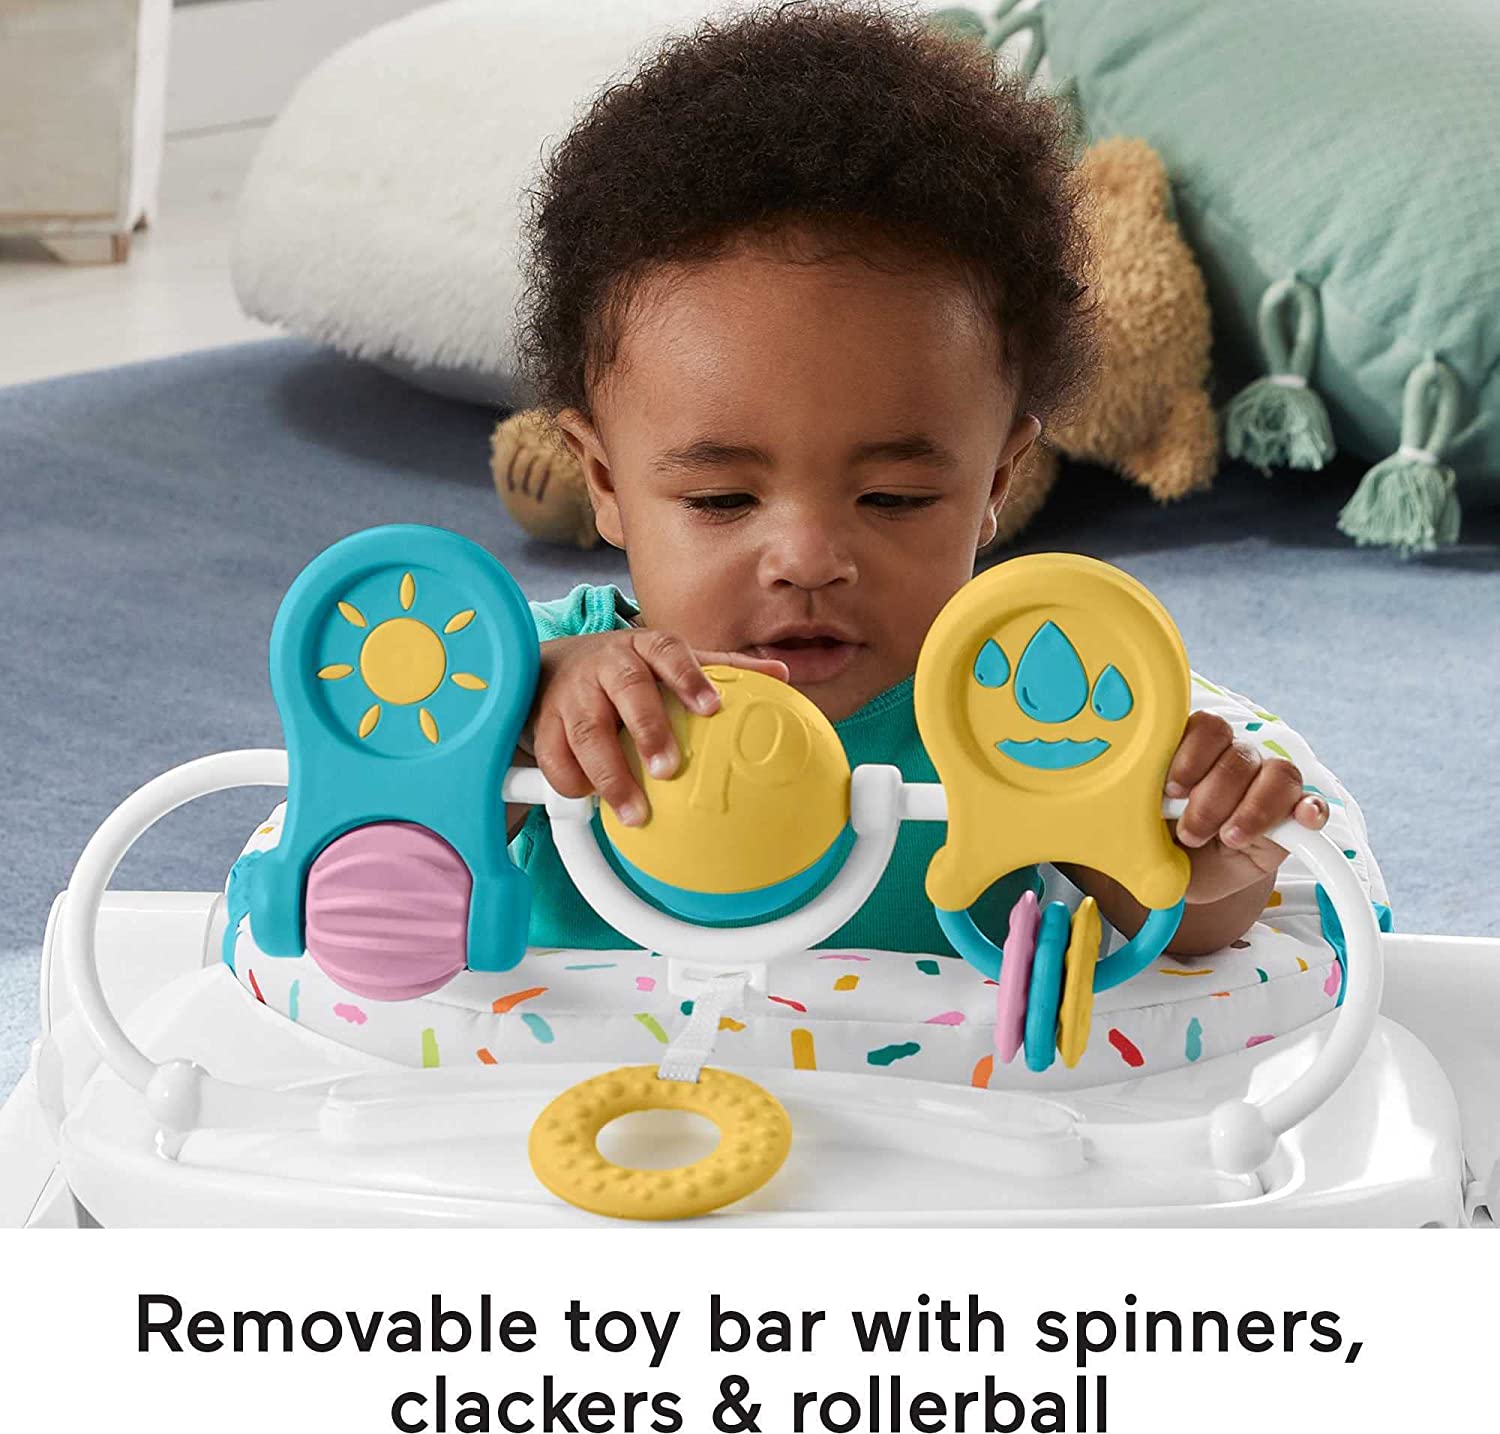 Fisher-Price Deluxe Sit-Me-Up Floor Seat, Rainbow Sprinkles -  Portable Infant Chair with Tray and toy bar